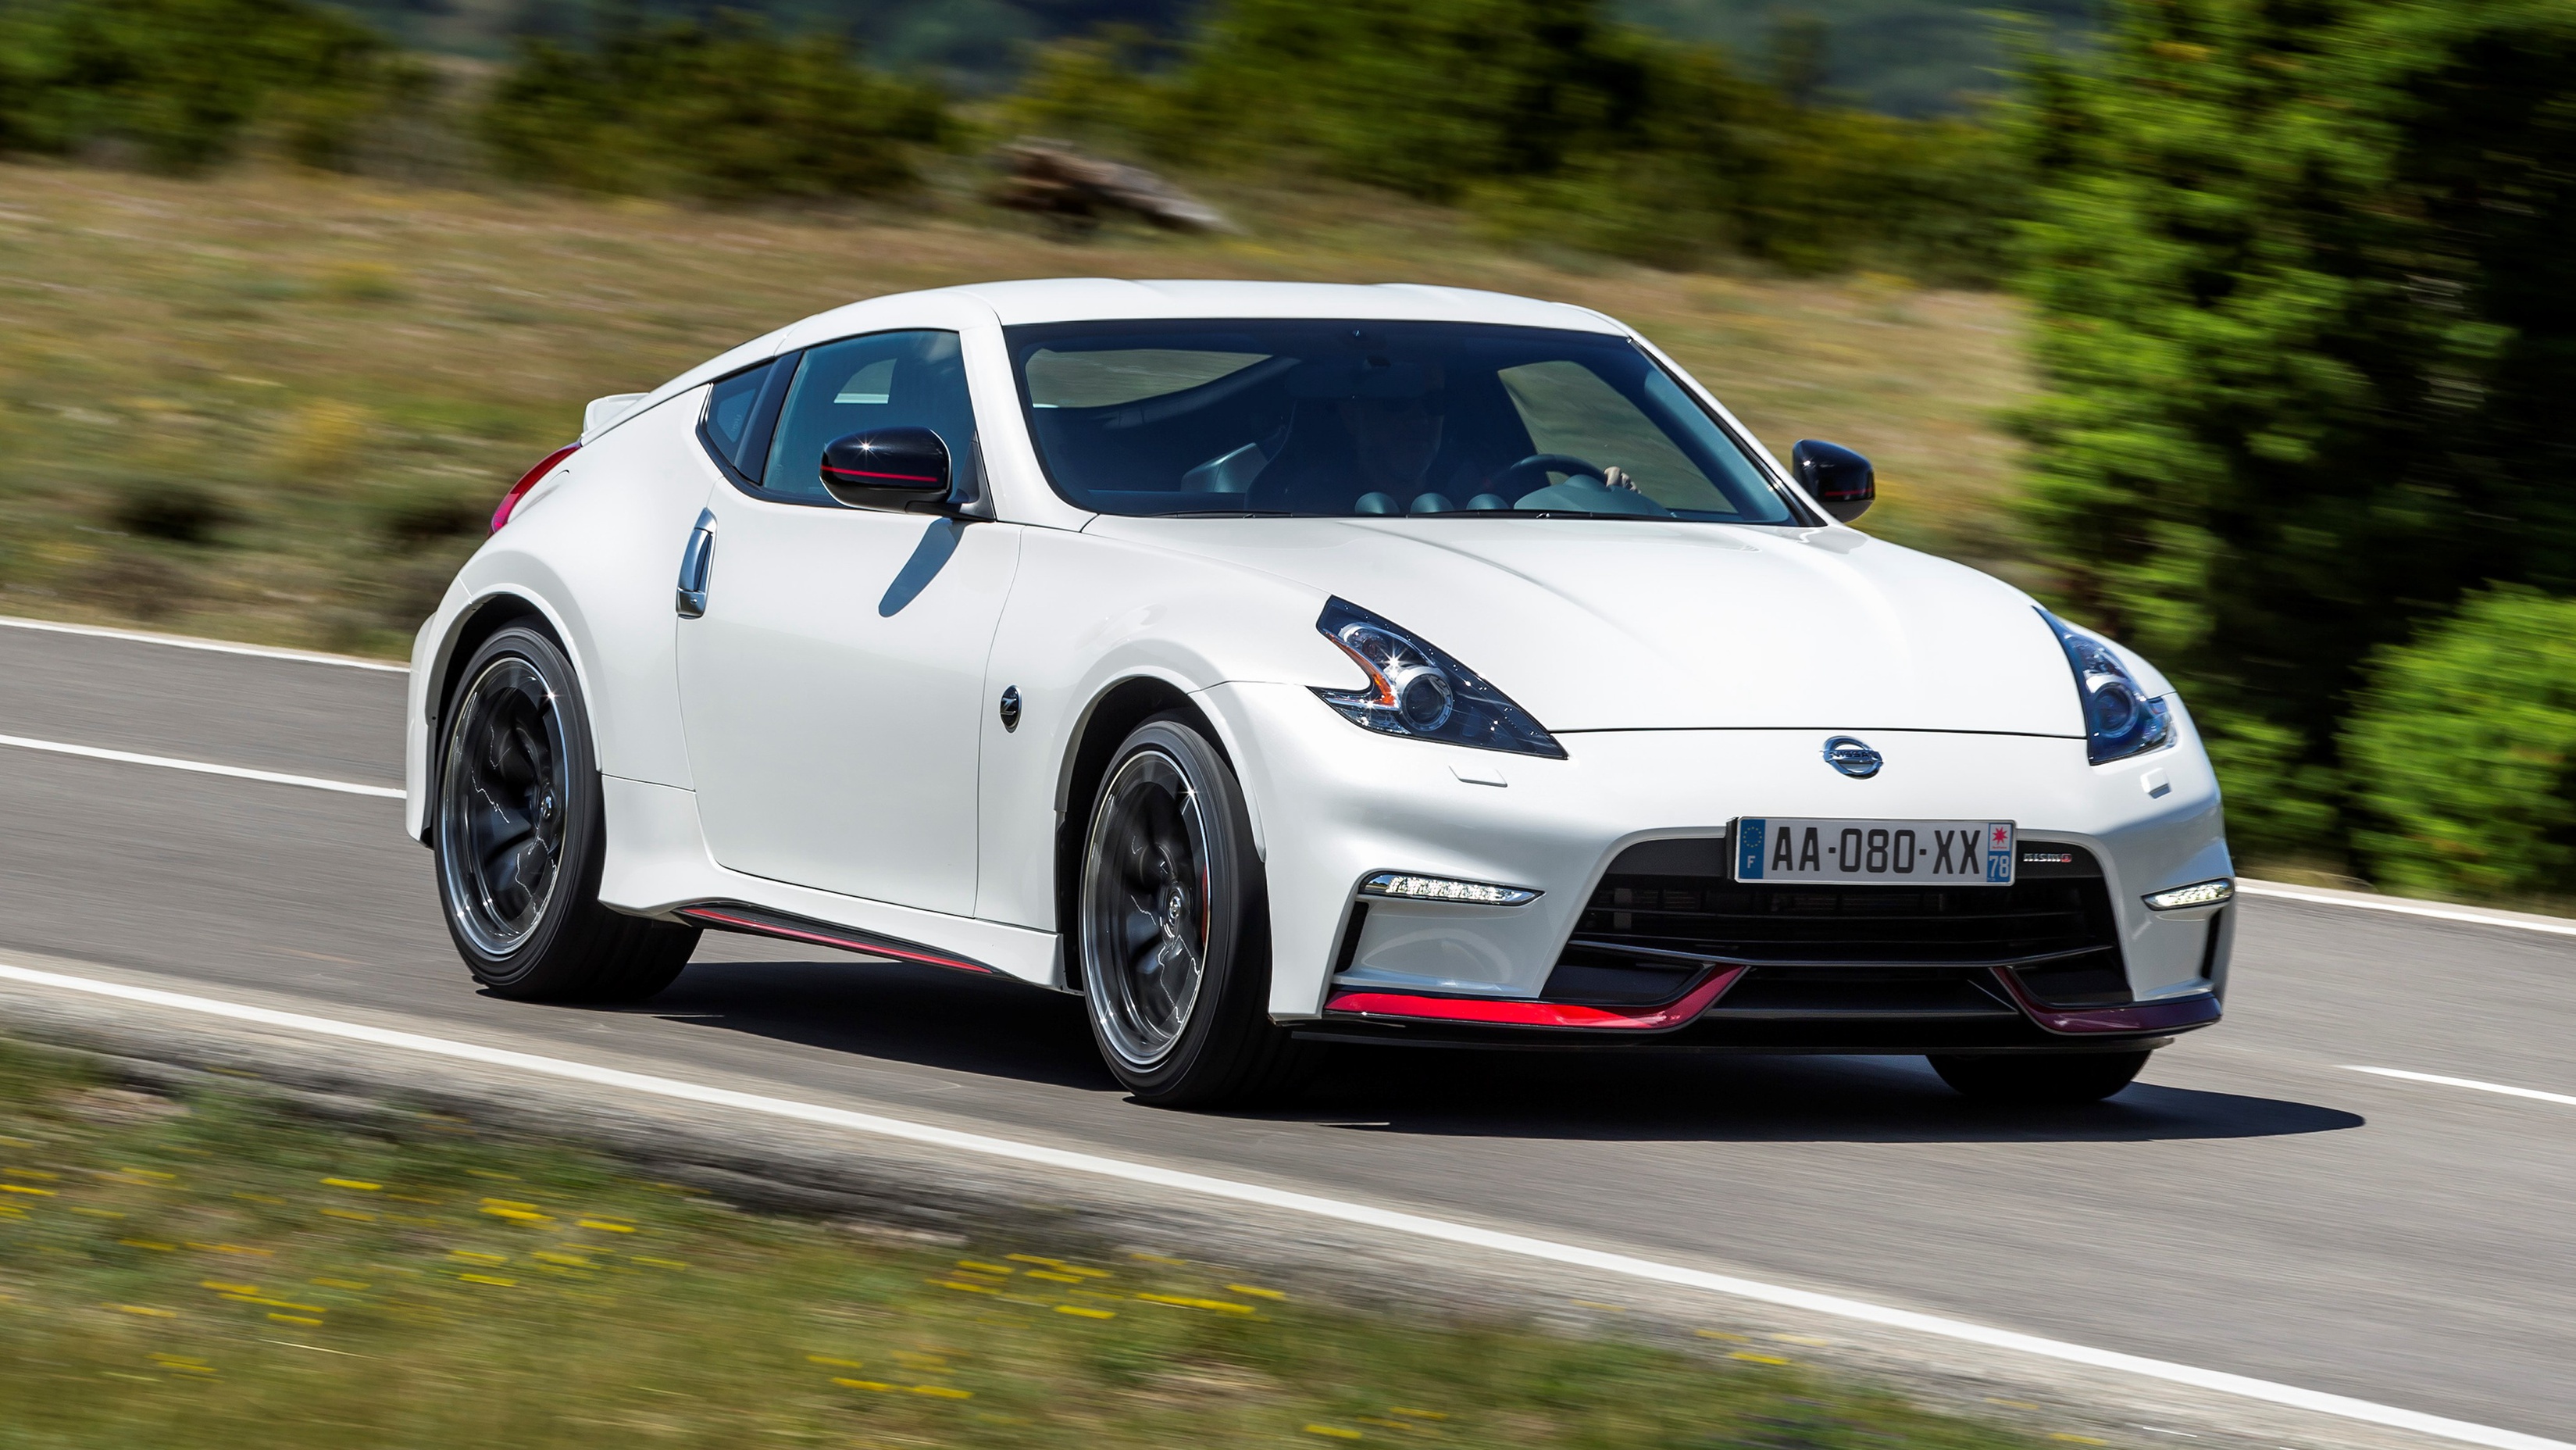 News - Next-Generation Nissan Z To Debut With Twin-Turbo V6